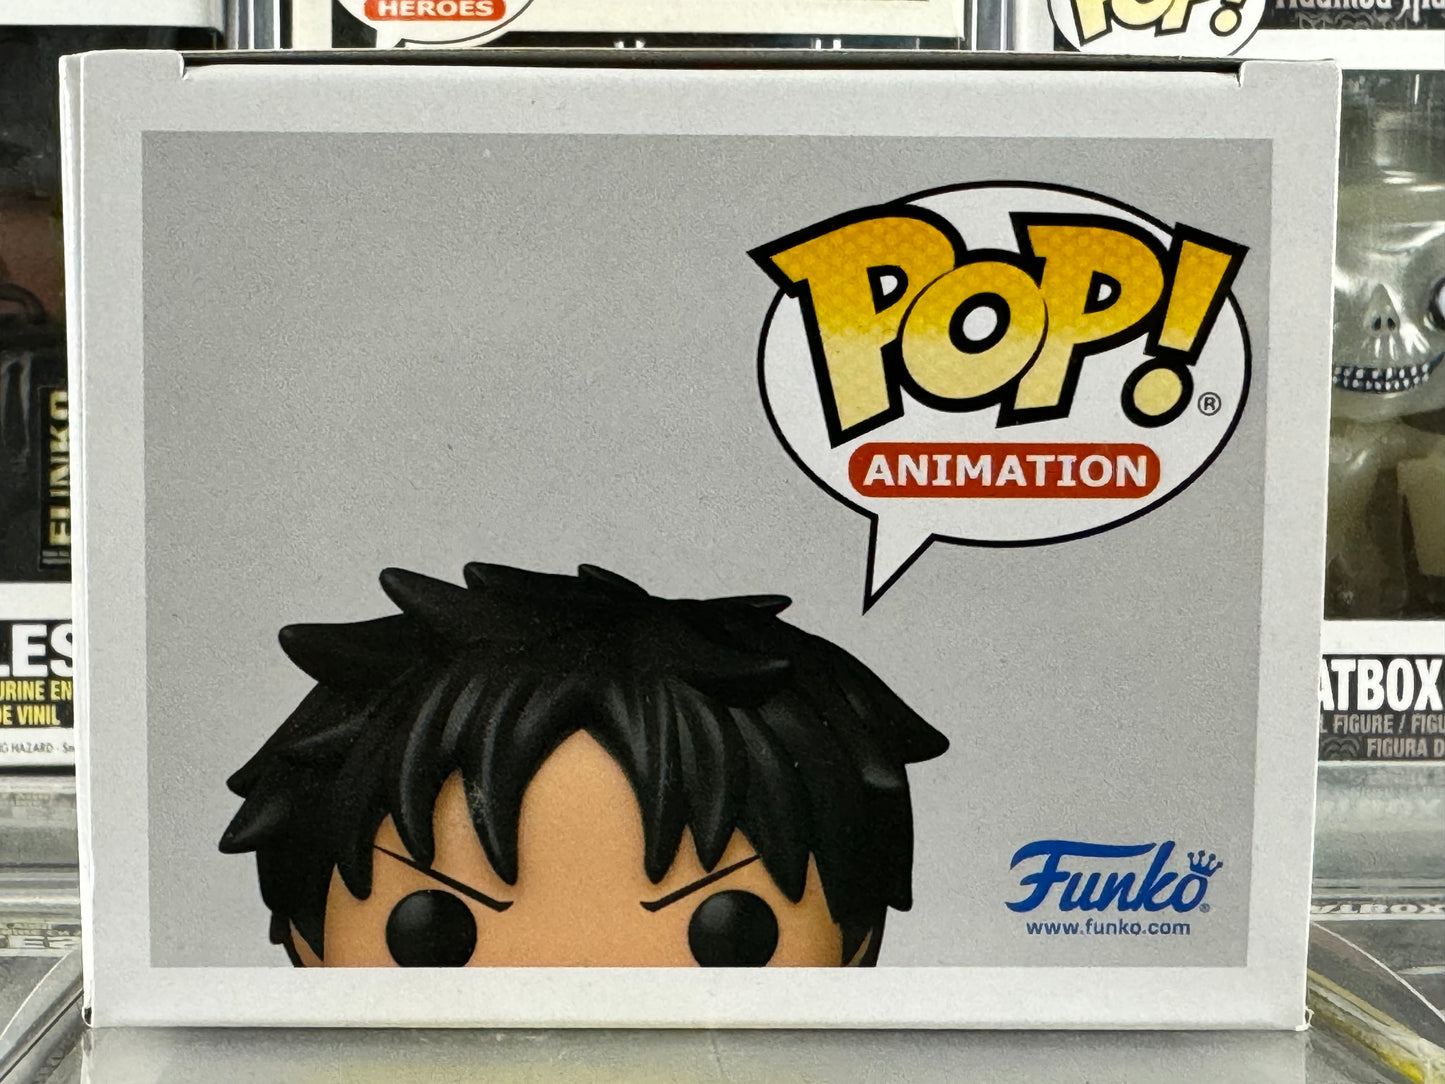 One Piece - Luffy Gear Two (1269) CHASE